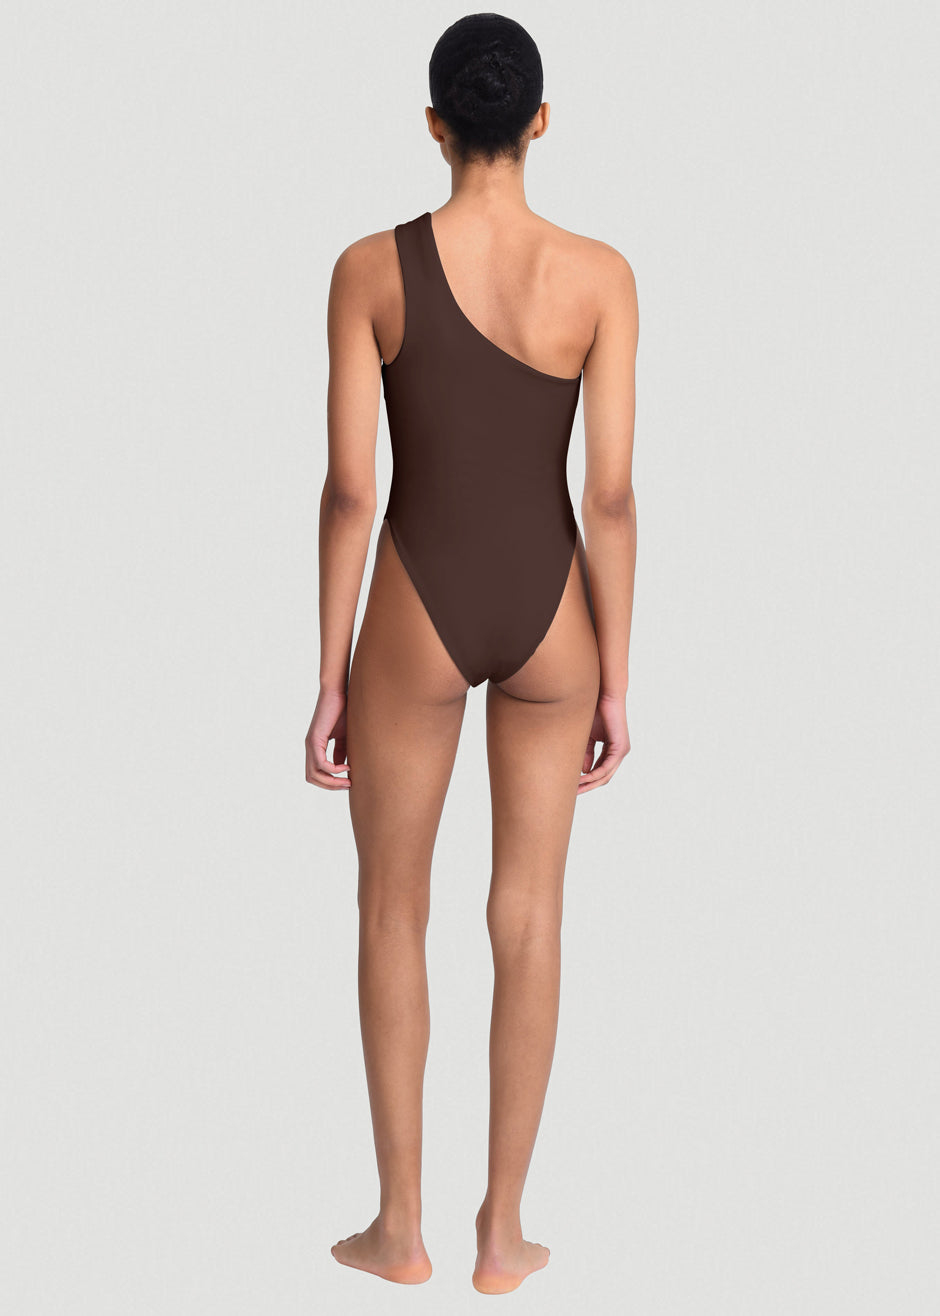 Aexae Knot One Piece Swimsuit - Brown - 2